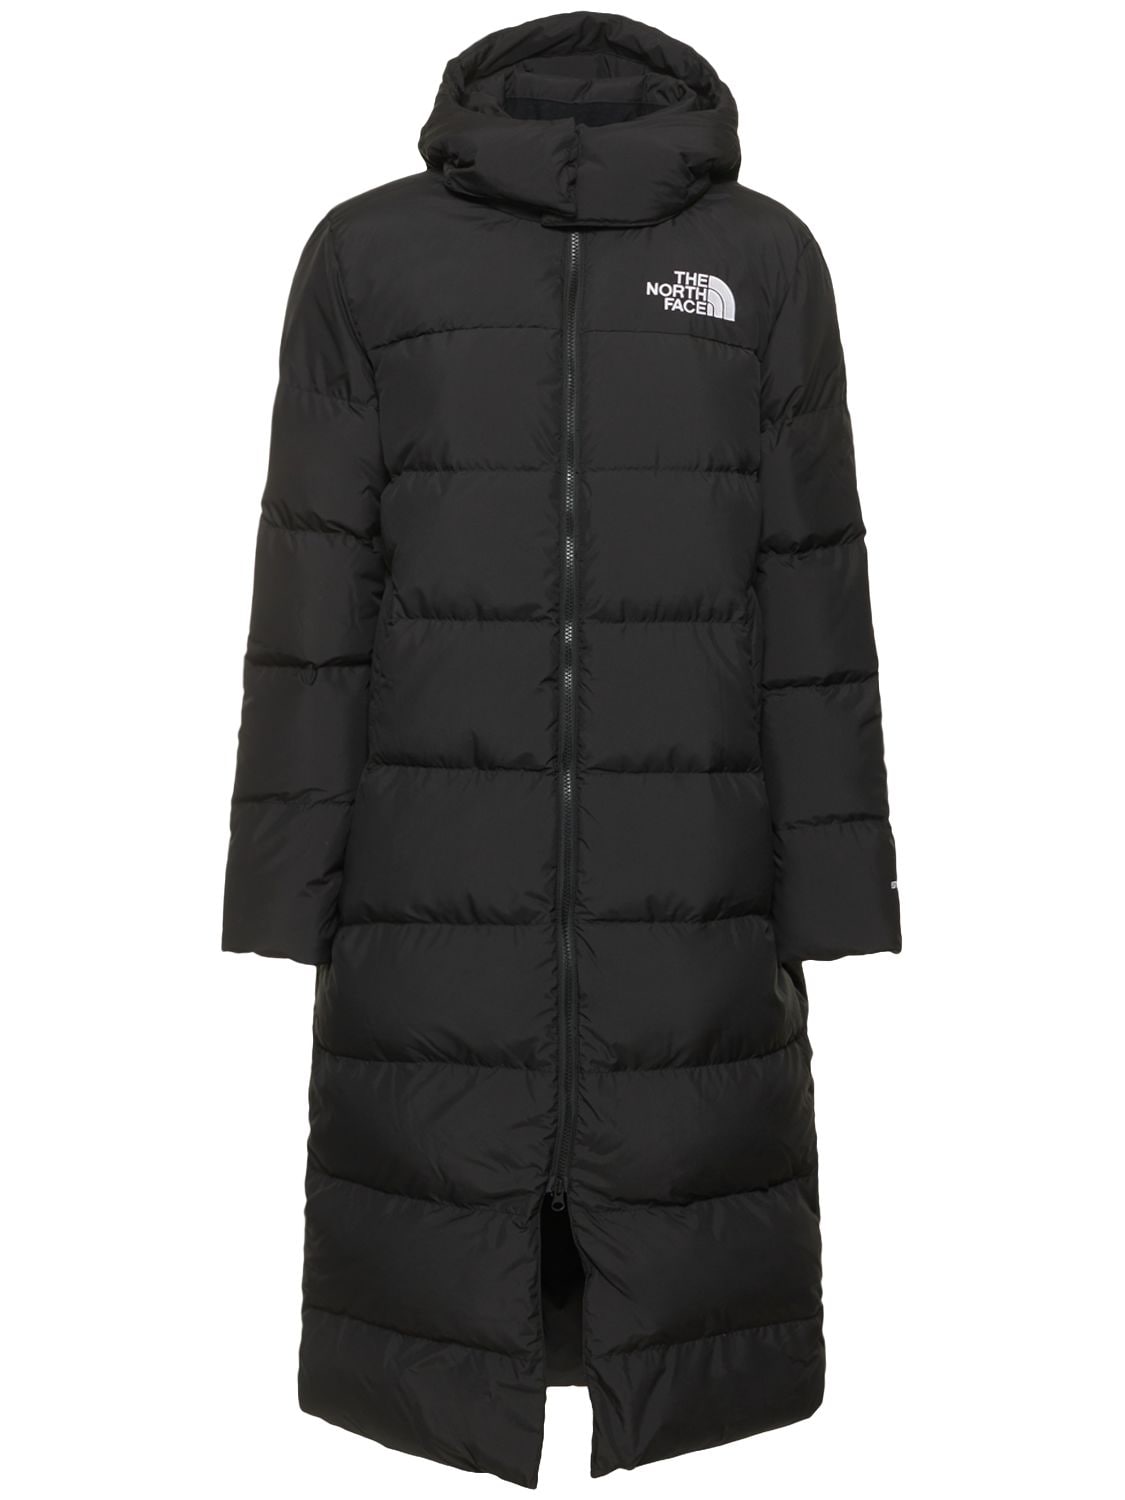 THE NORTH FACE TRIPLE C POLYESTER DOWN PARKA